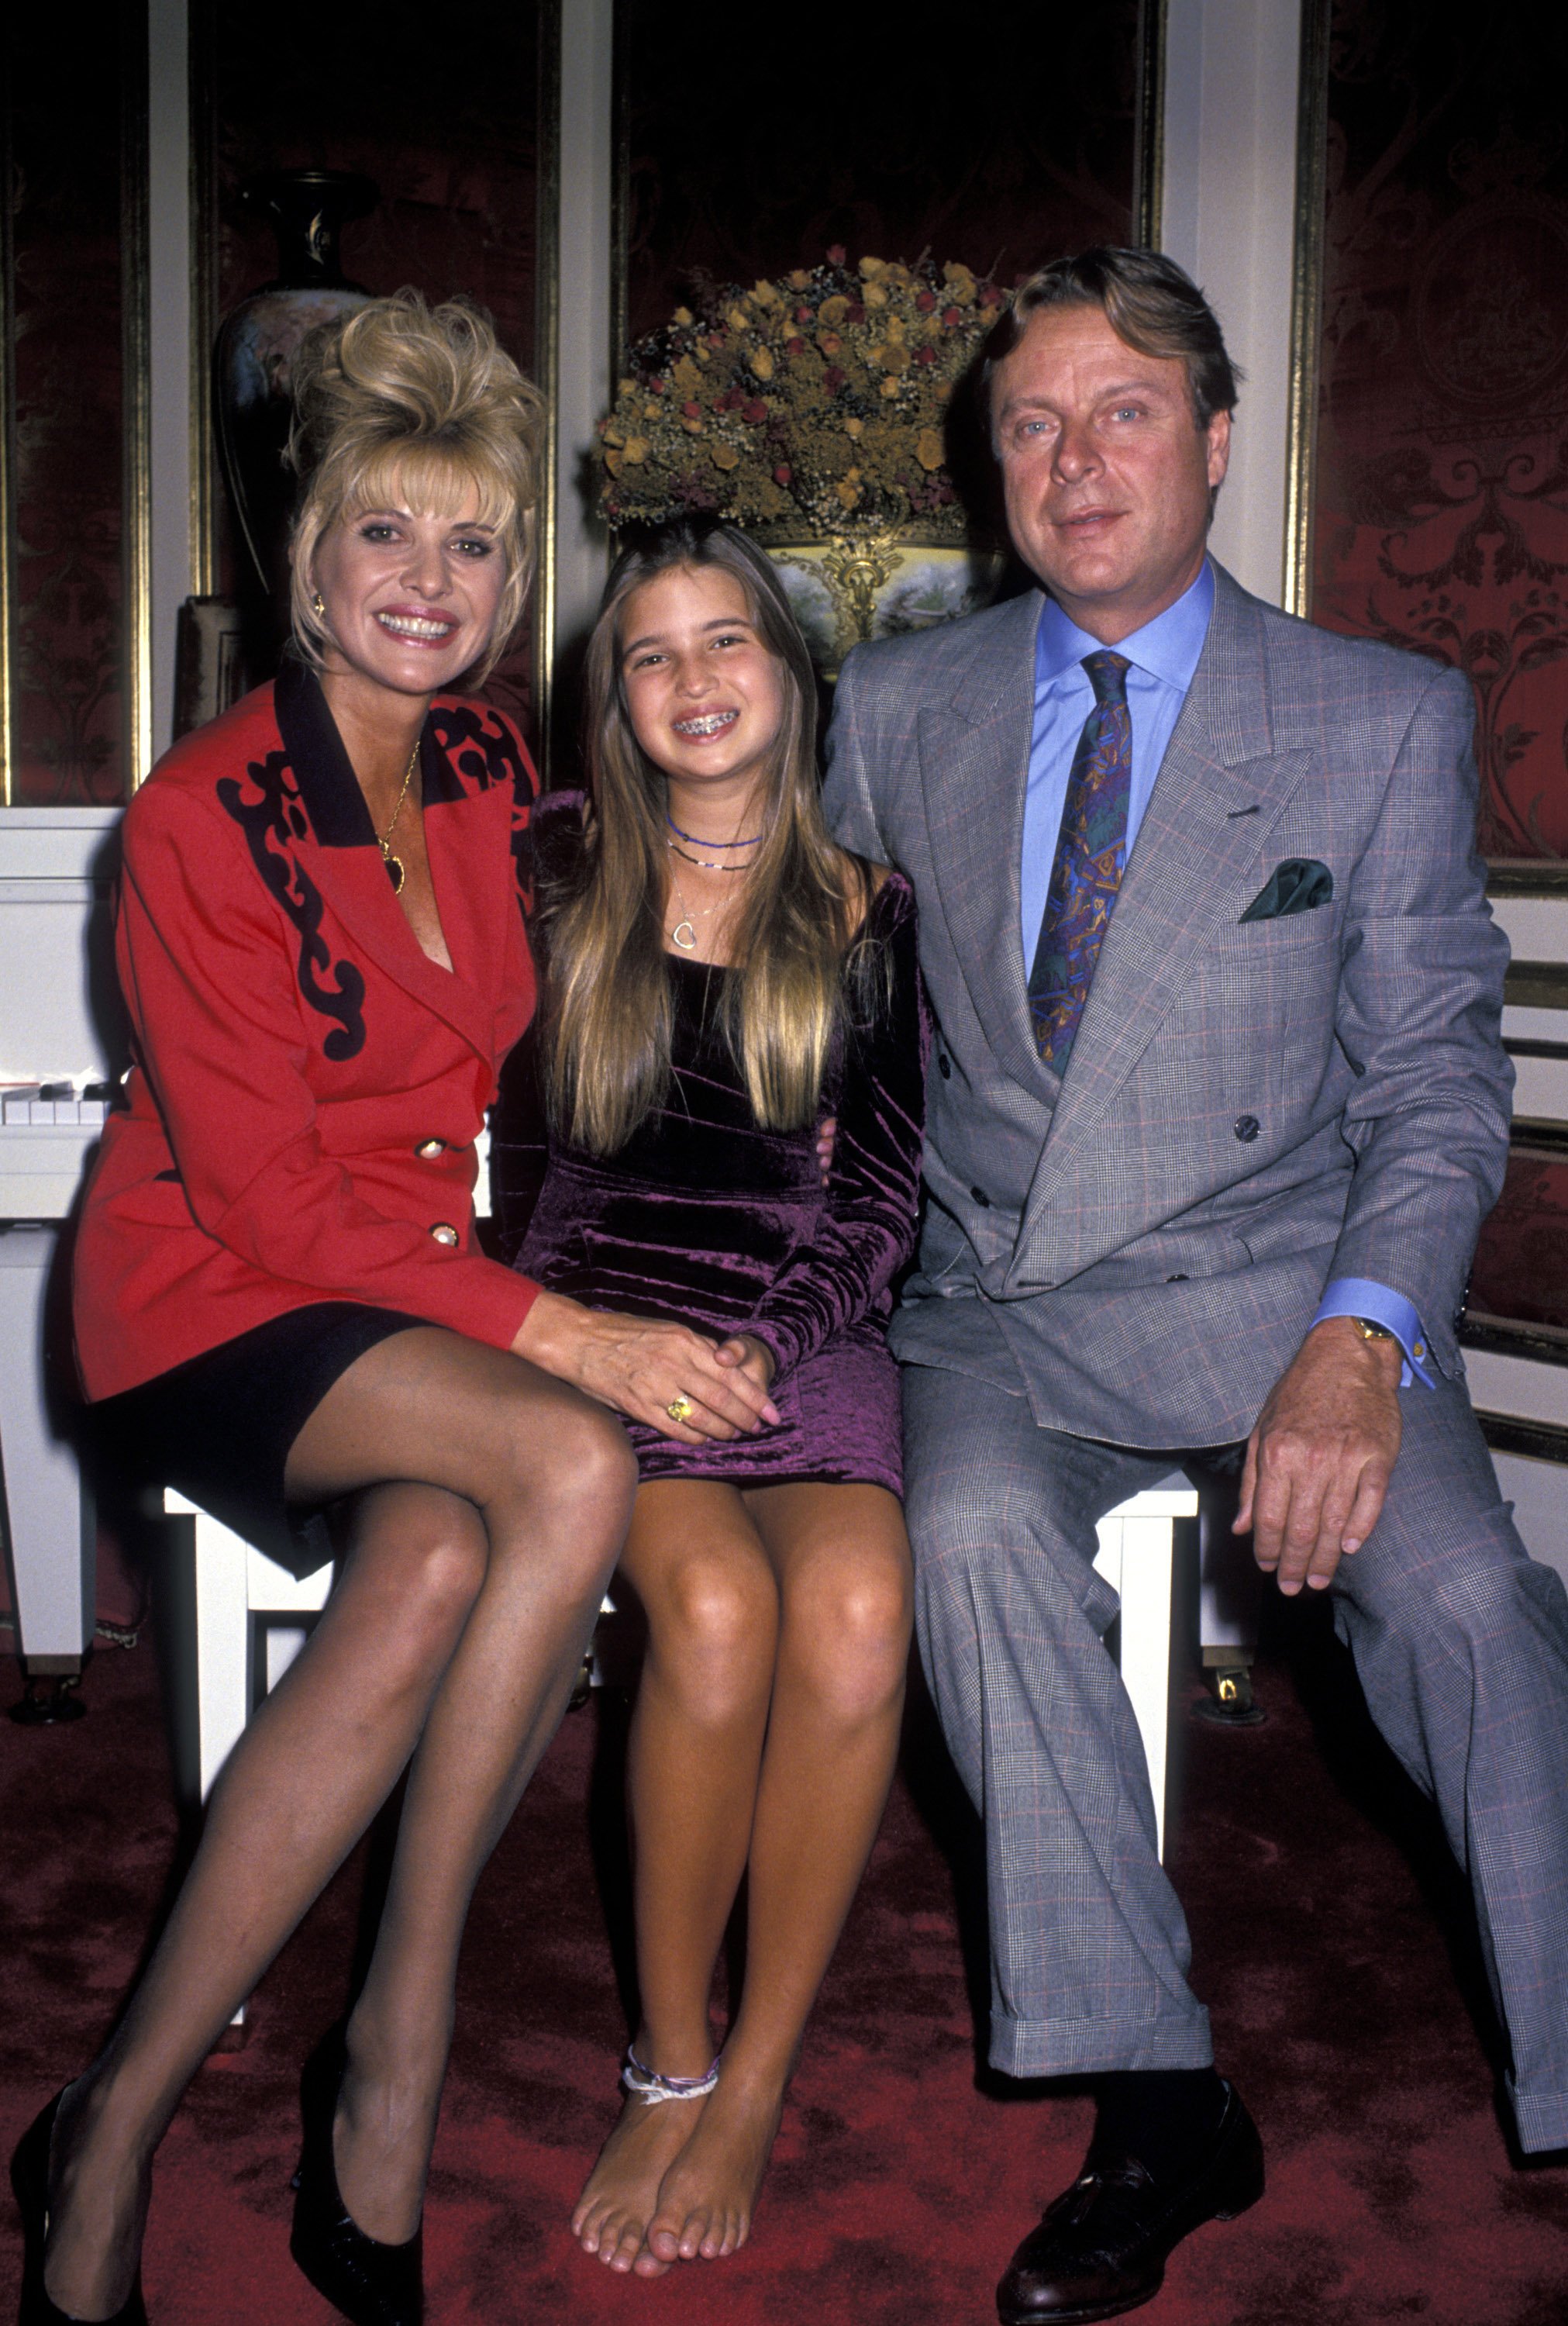 Ivana Trump pictured with her daughter Ivanka and Riccardo Mazzucchelli during Exclusive Photo Shoot with Ivana Trump at Ivana's townhouse on September 27, 1994 in New York City, New York.┃Source: Getty Images